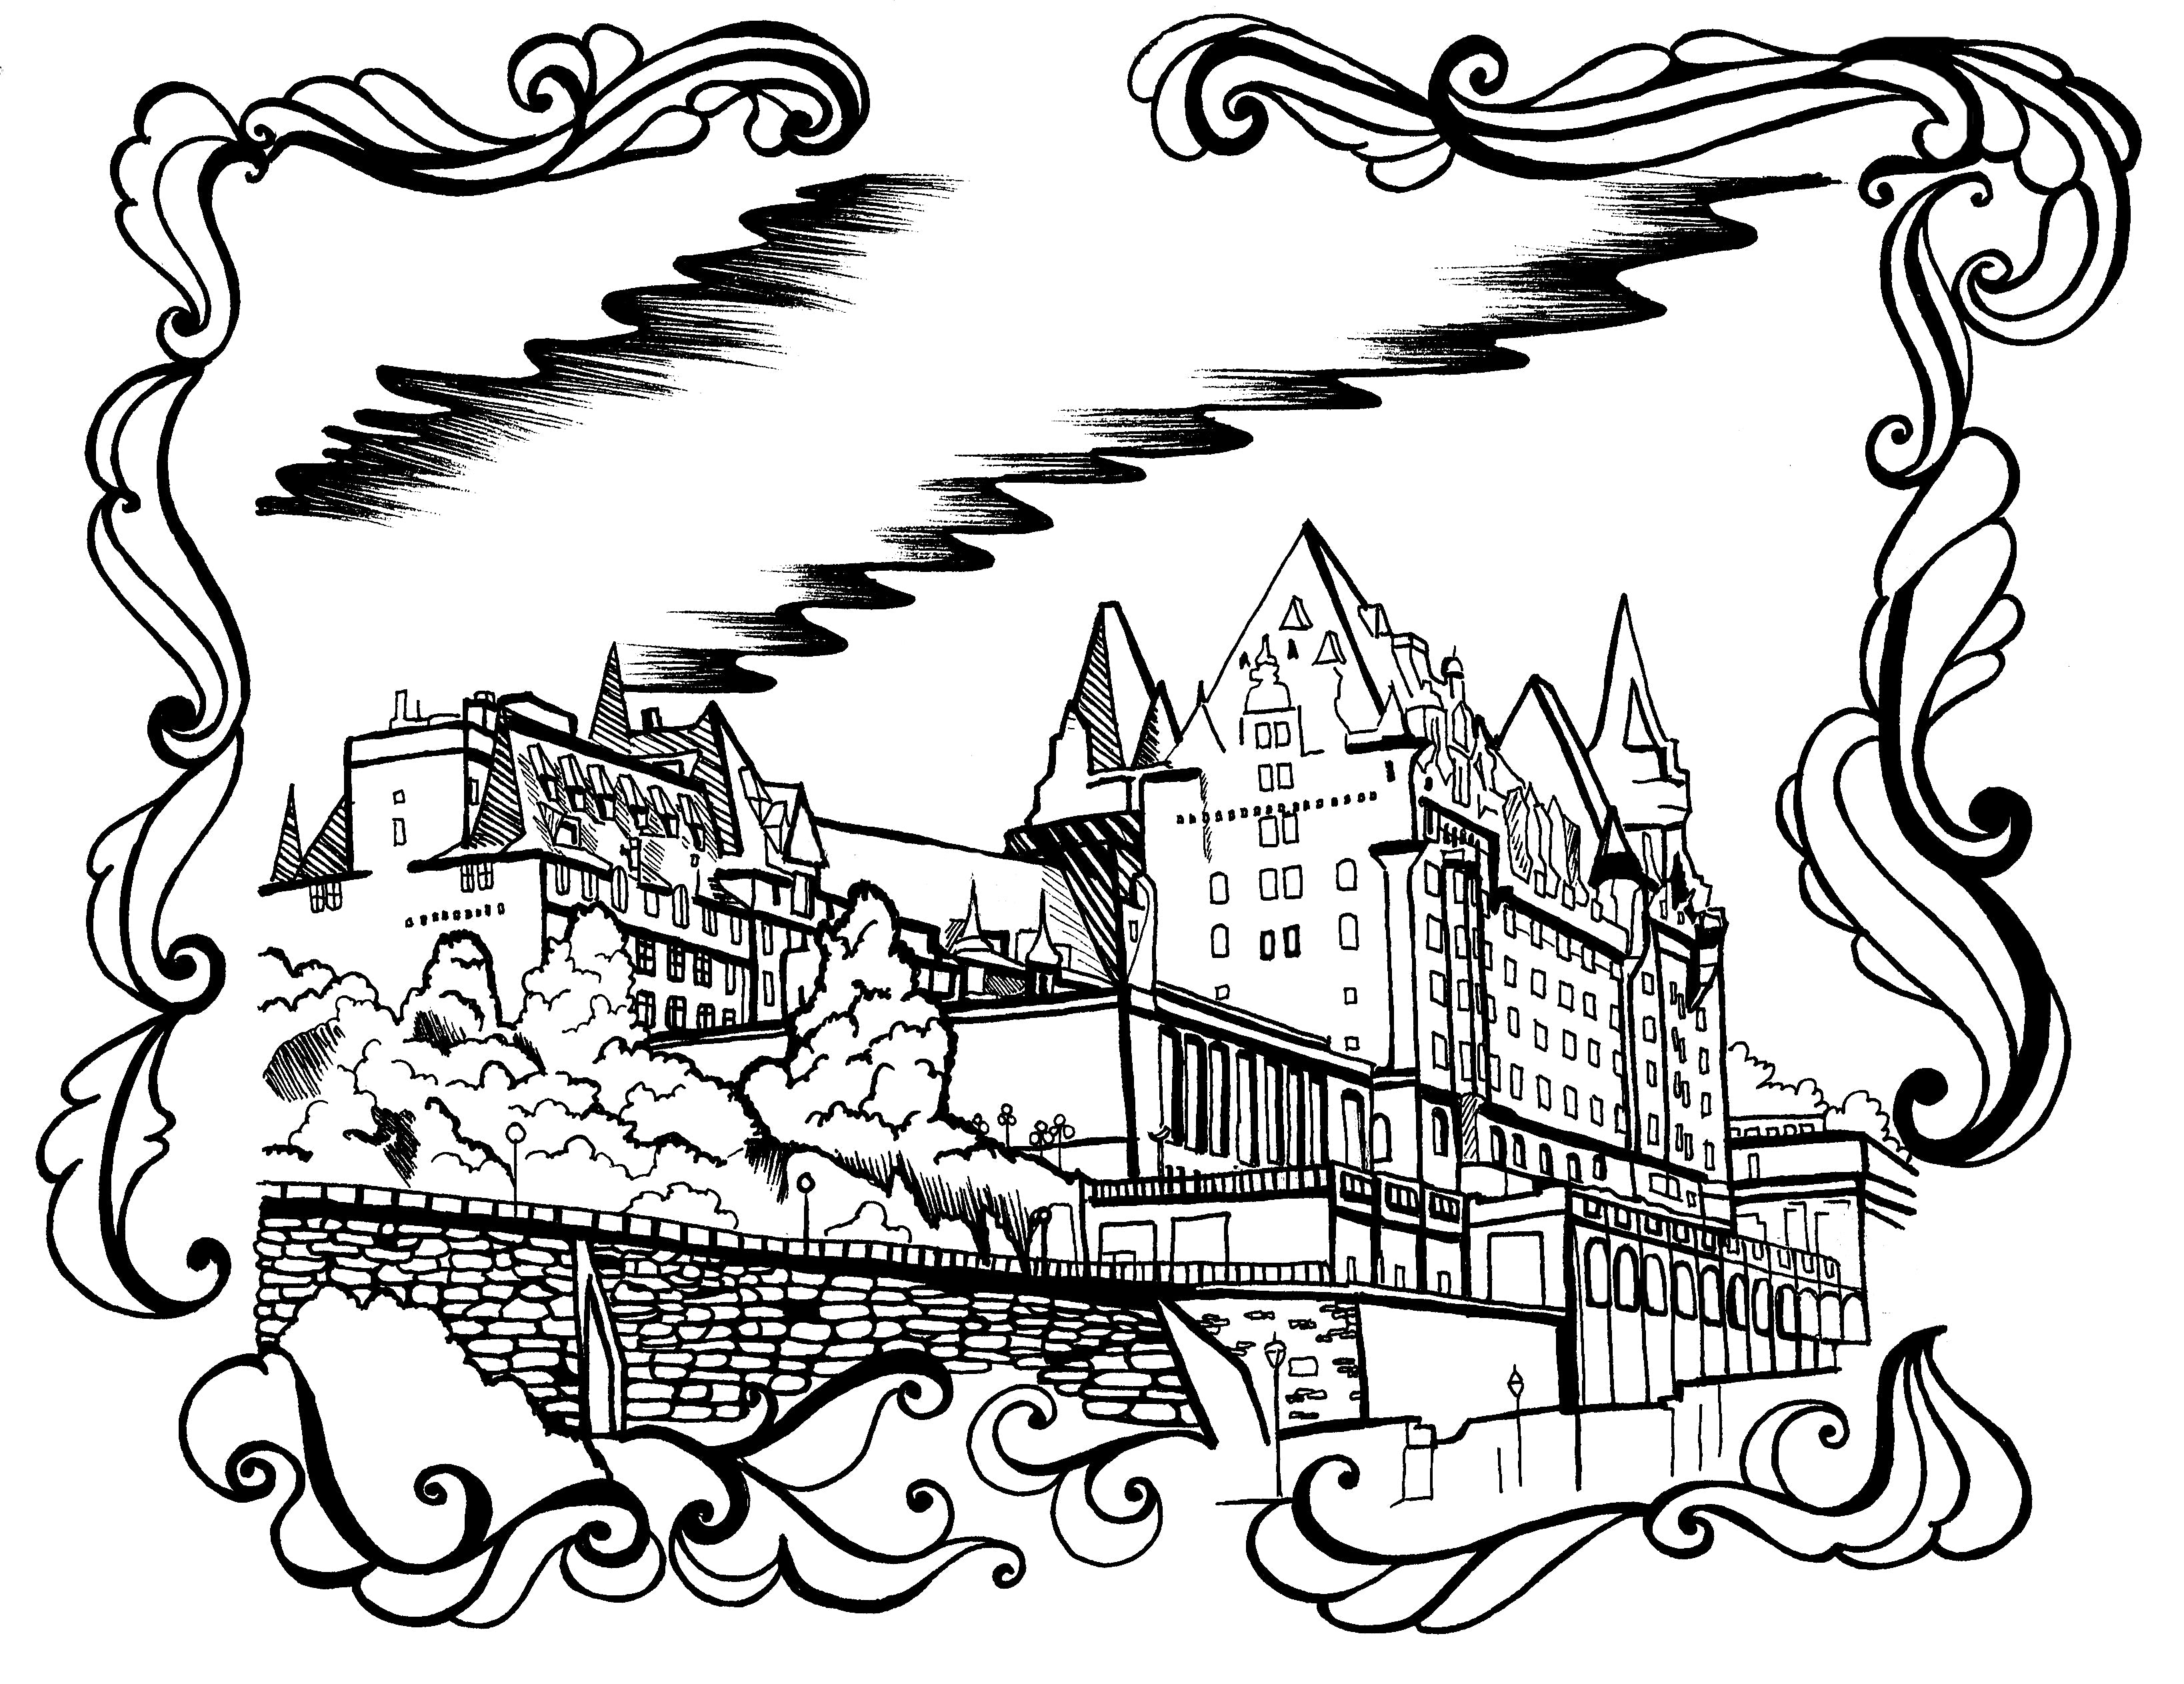 Line art illustration of the Fairmont Château Laurier in Ottawa for coloring, framed by an elegant, ornate border. The drawing captures the grandeur of the historic hotel with its peaked roofs, turrets, and intricate detailing, set against a backdrop of stylized clouds, conveying a sense of Canadian heritage and architectural beauty.Free Coloring page :: You-Color